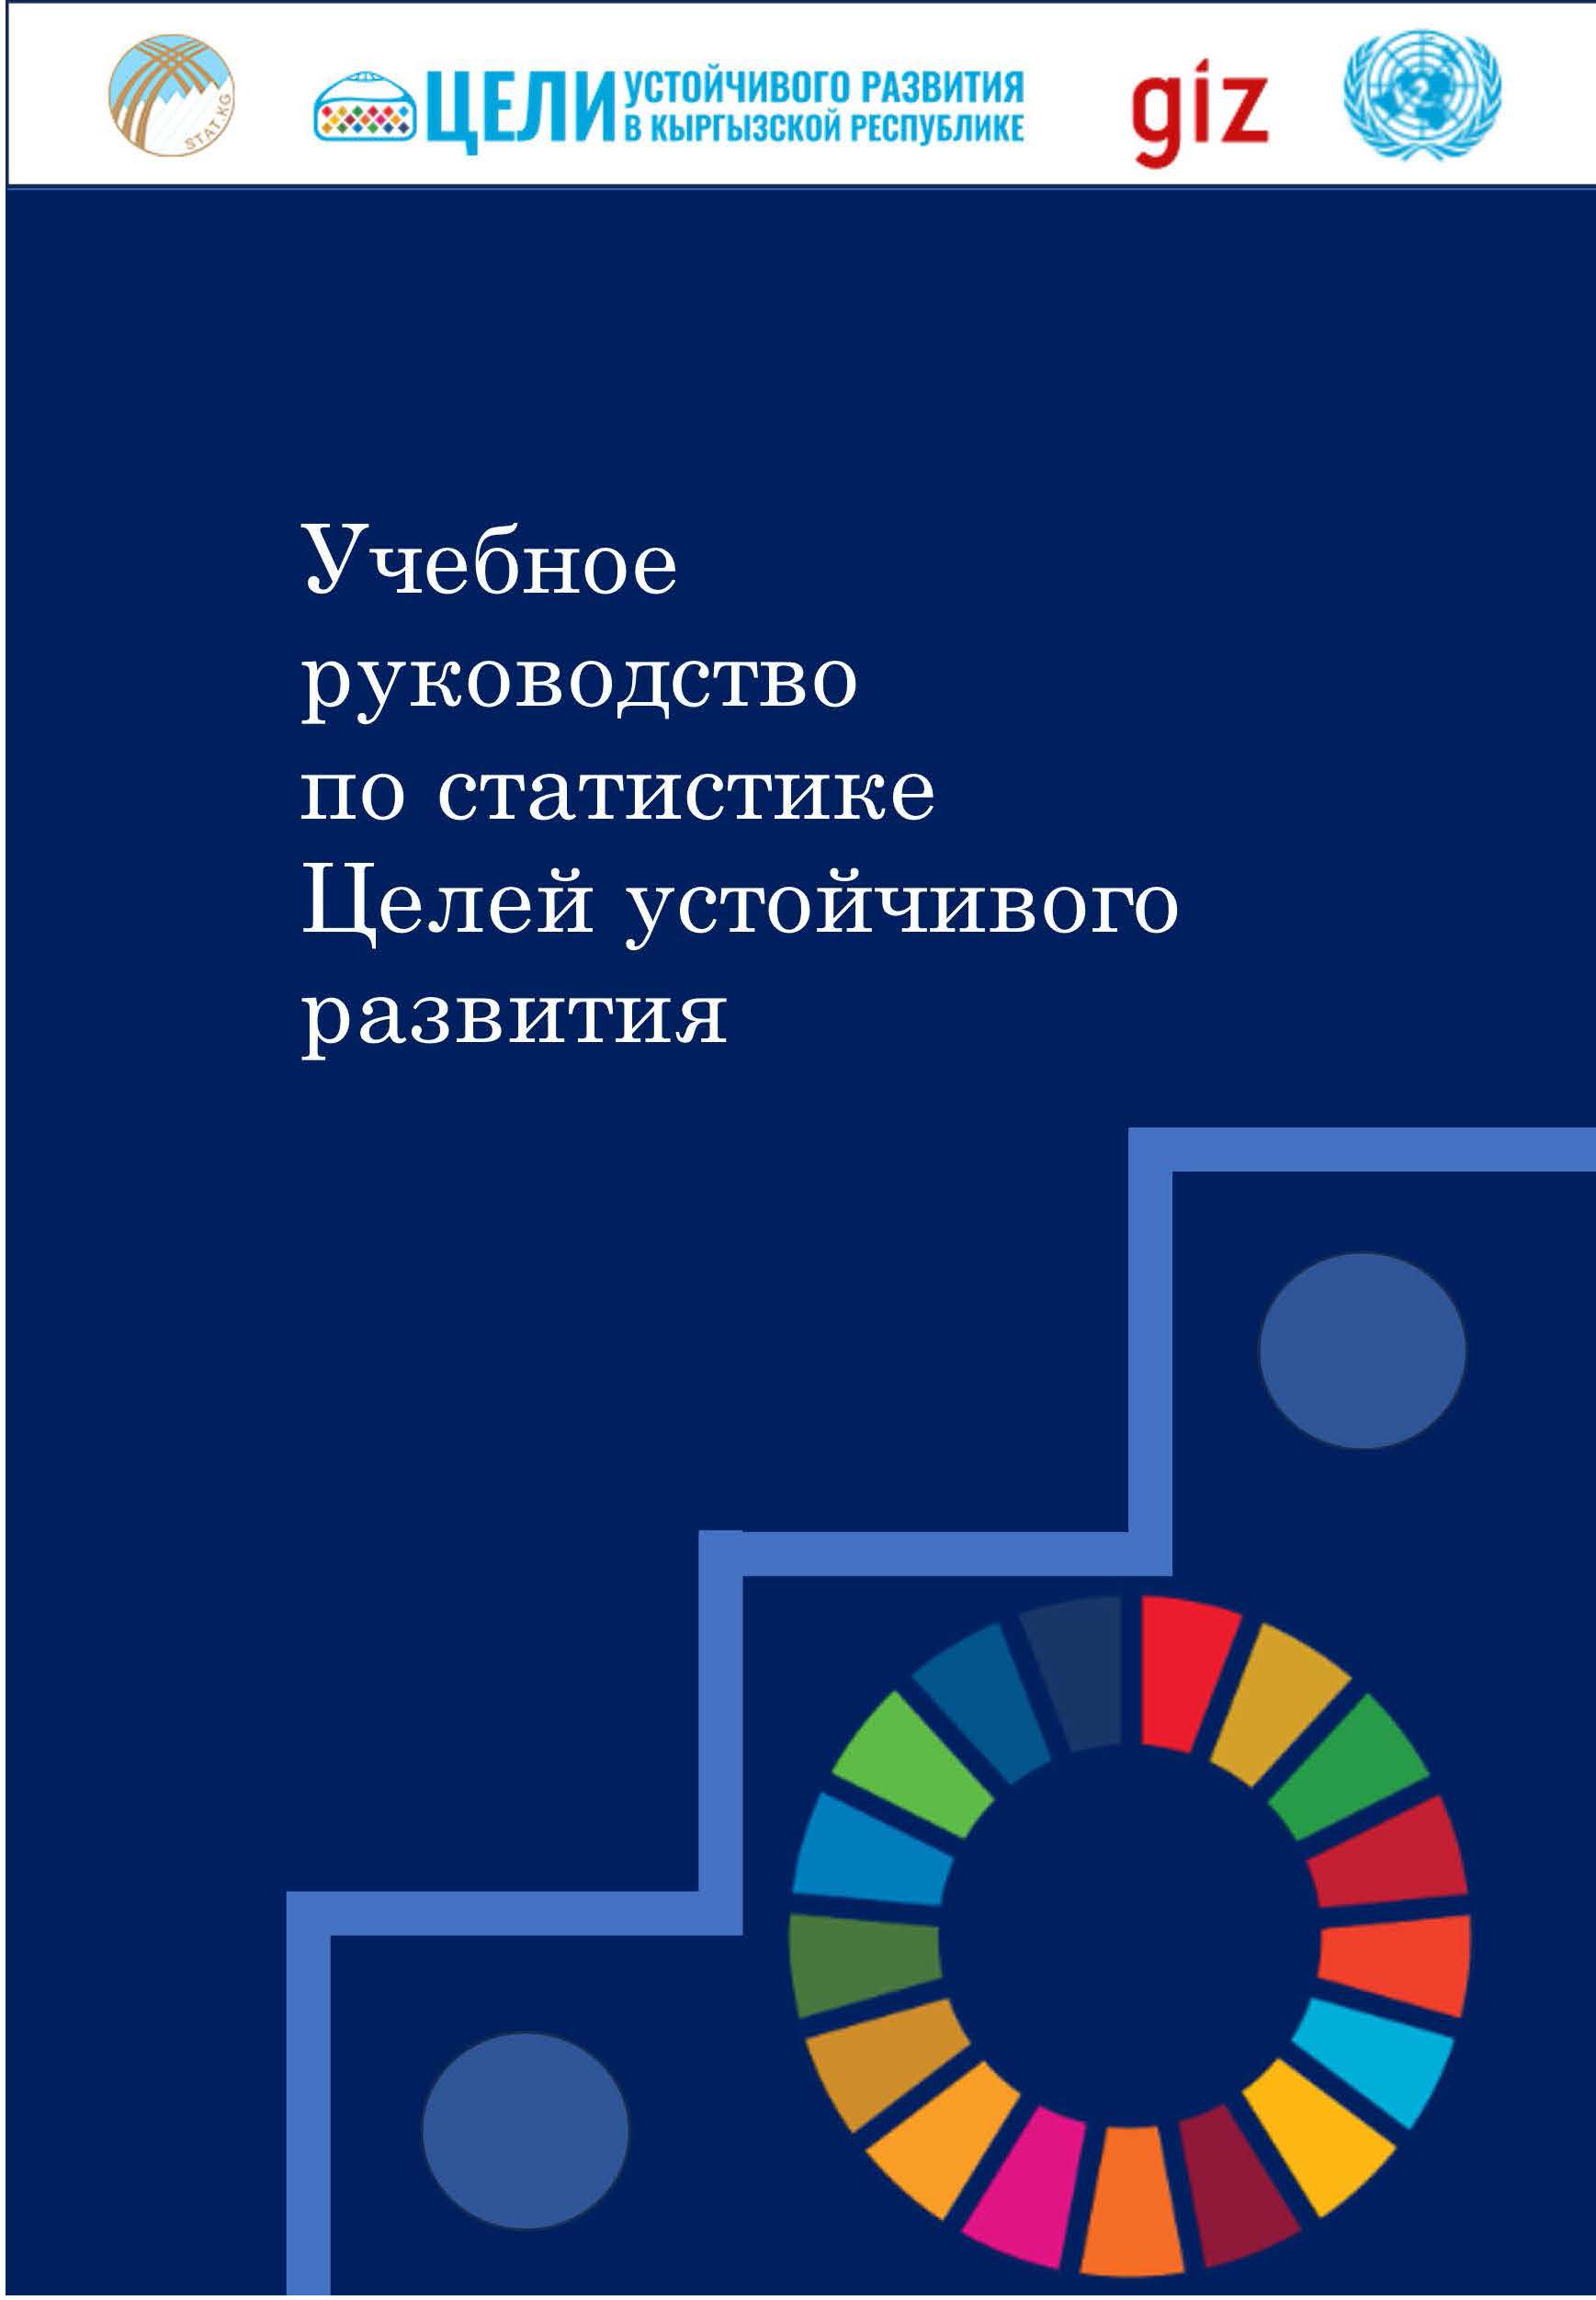 A Tutorial on Statistics of the Sustainable Development Goals